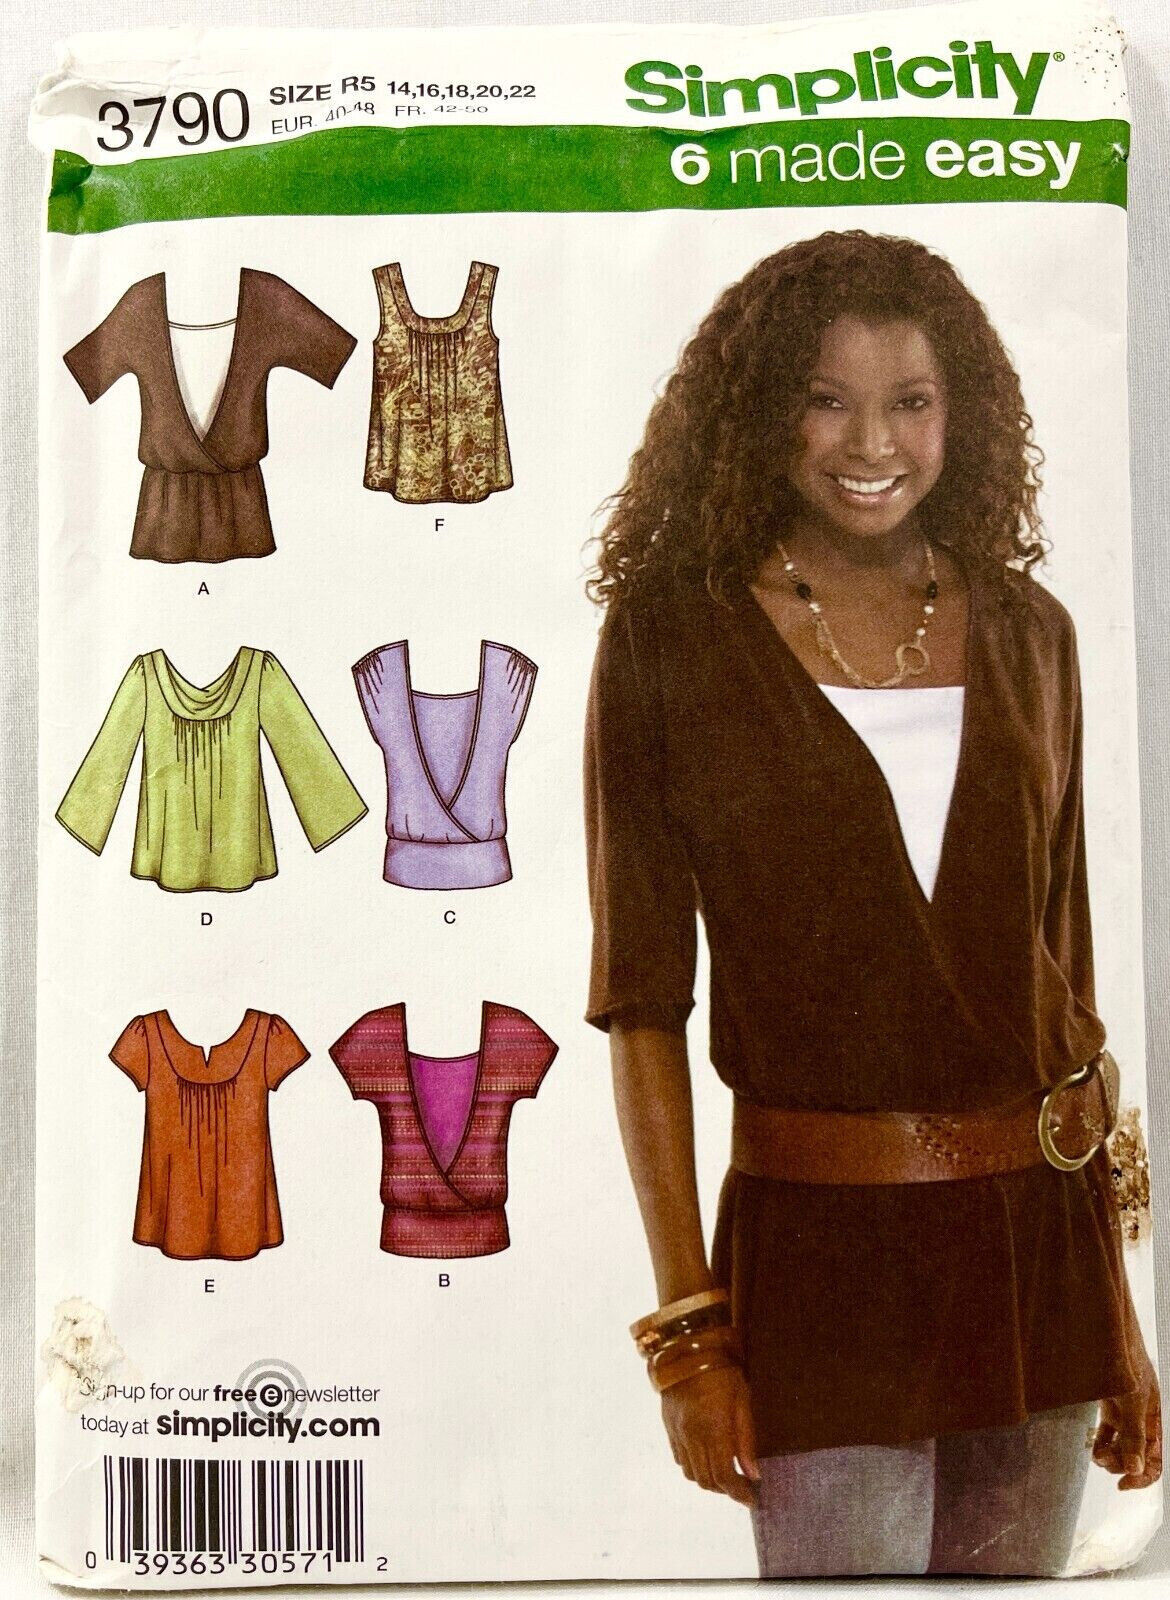 2007 Simplicity Sewing Pattern 3790 Womens Tops 6 Styles Size 14-22 UNCUT 11887